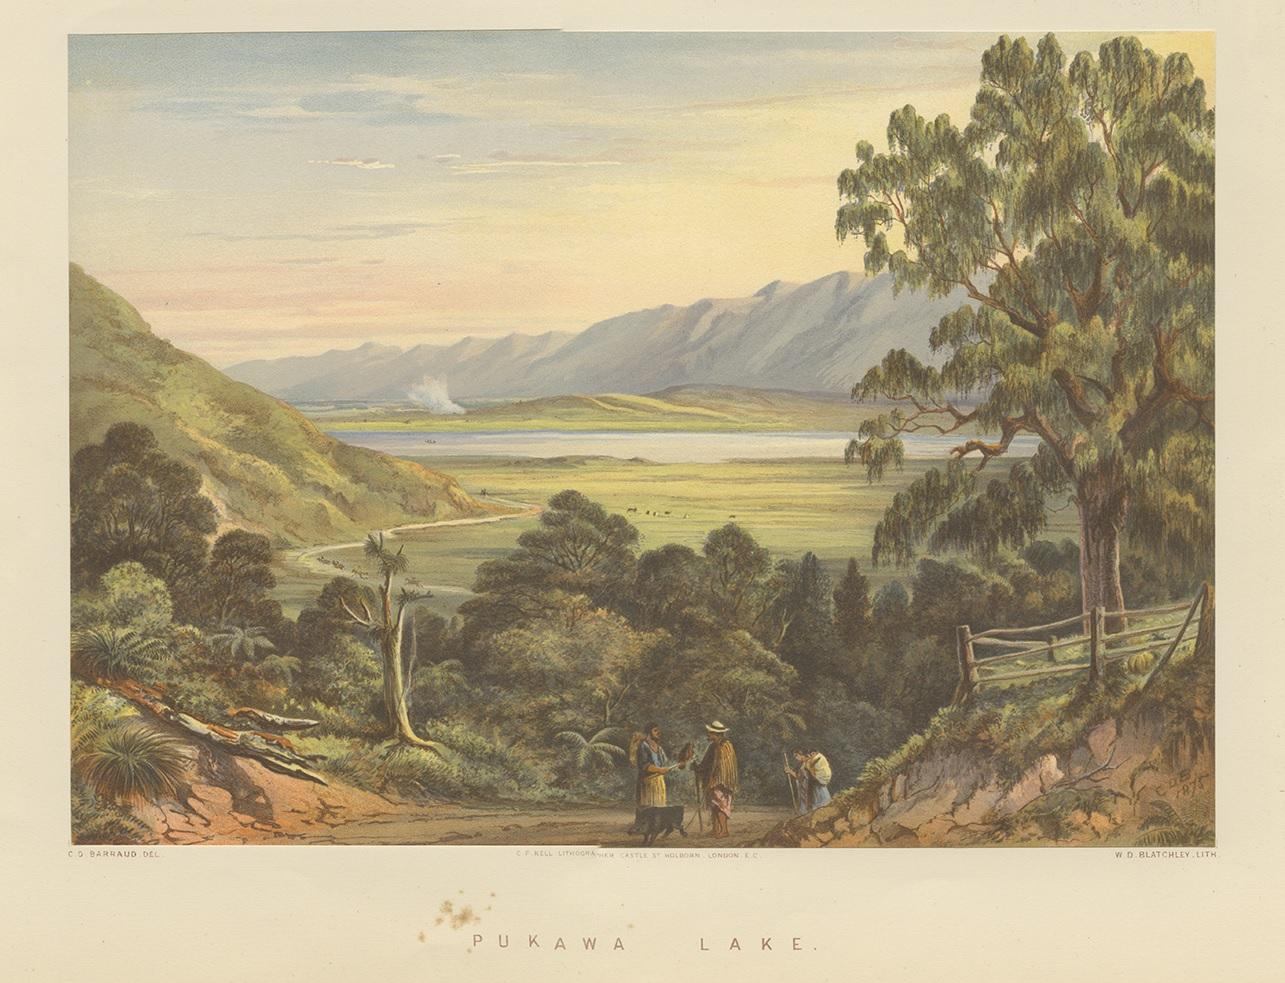 Antique print titled 'Pukawa Lake'. View of Pukawa Bay, a bay and a small township on the southern shores of Lake Taupo on New Zealand's North Island. Lithographed by W.D. Blatchley after a drawing by Barraud. This print originates from 'New